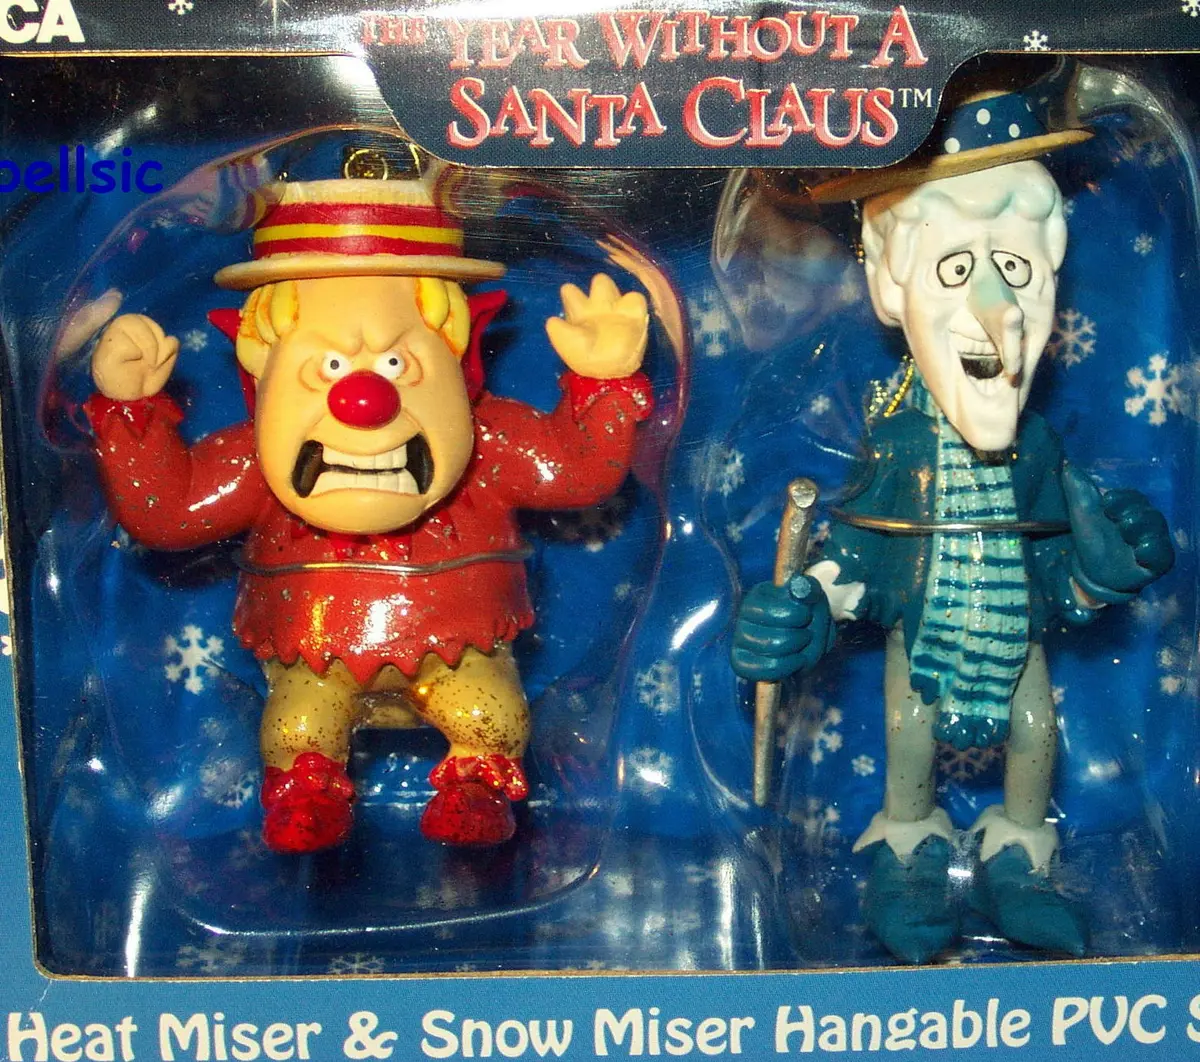 NEW Year Without a Santa Claus ornament set Heat Miser and Snow Miser NECA  PVC